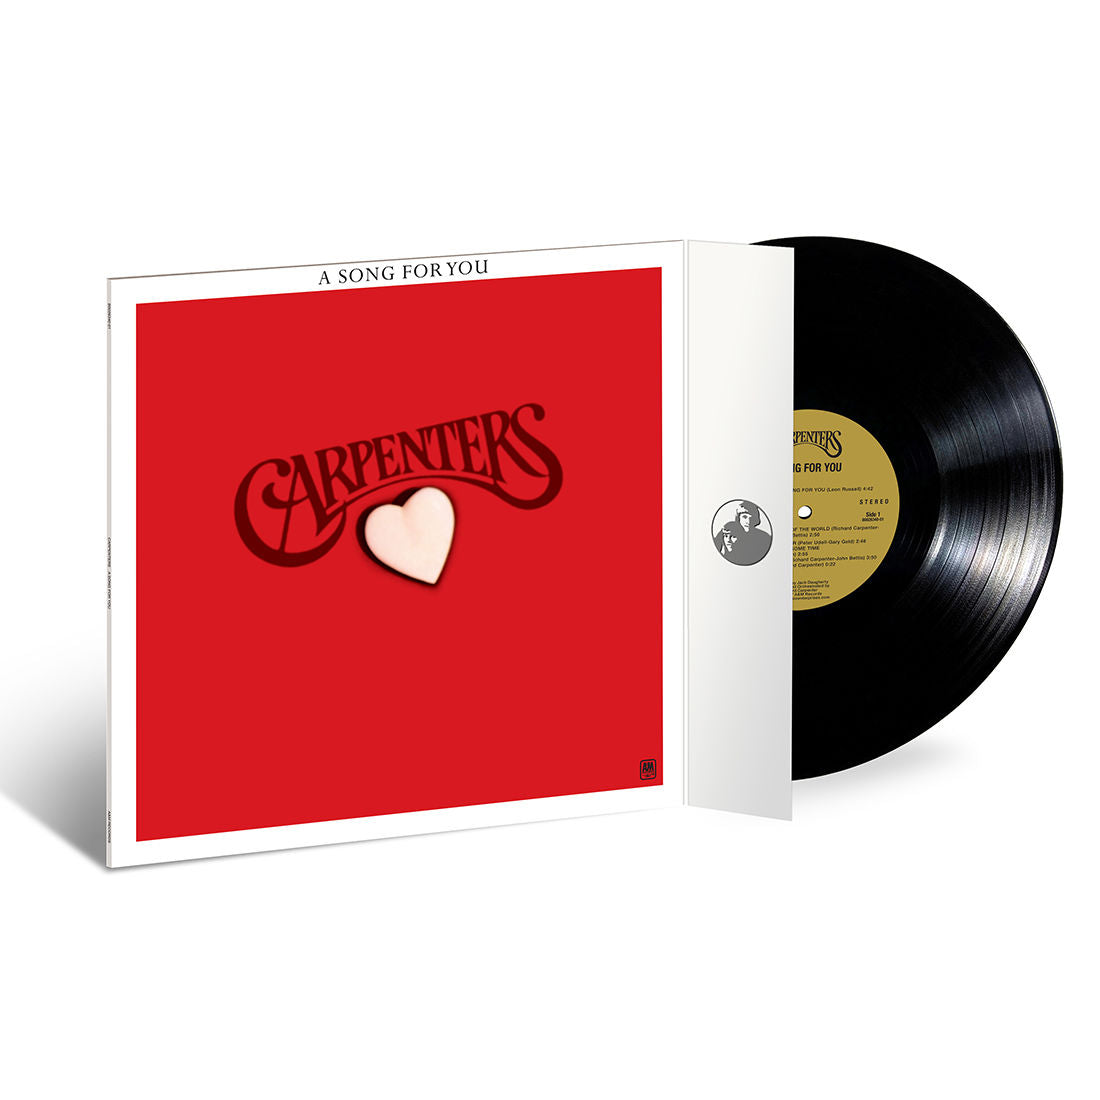 The Carpenters - A Song For You: Vinyl LP